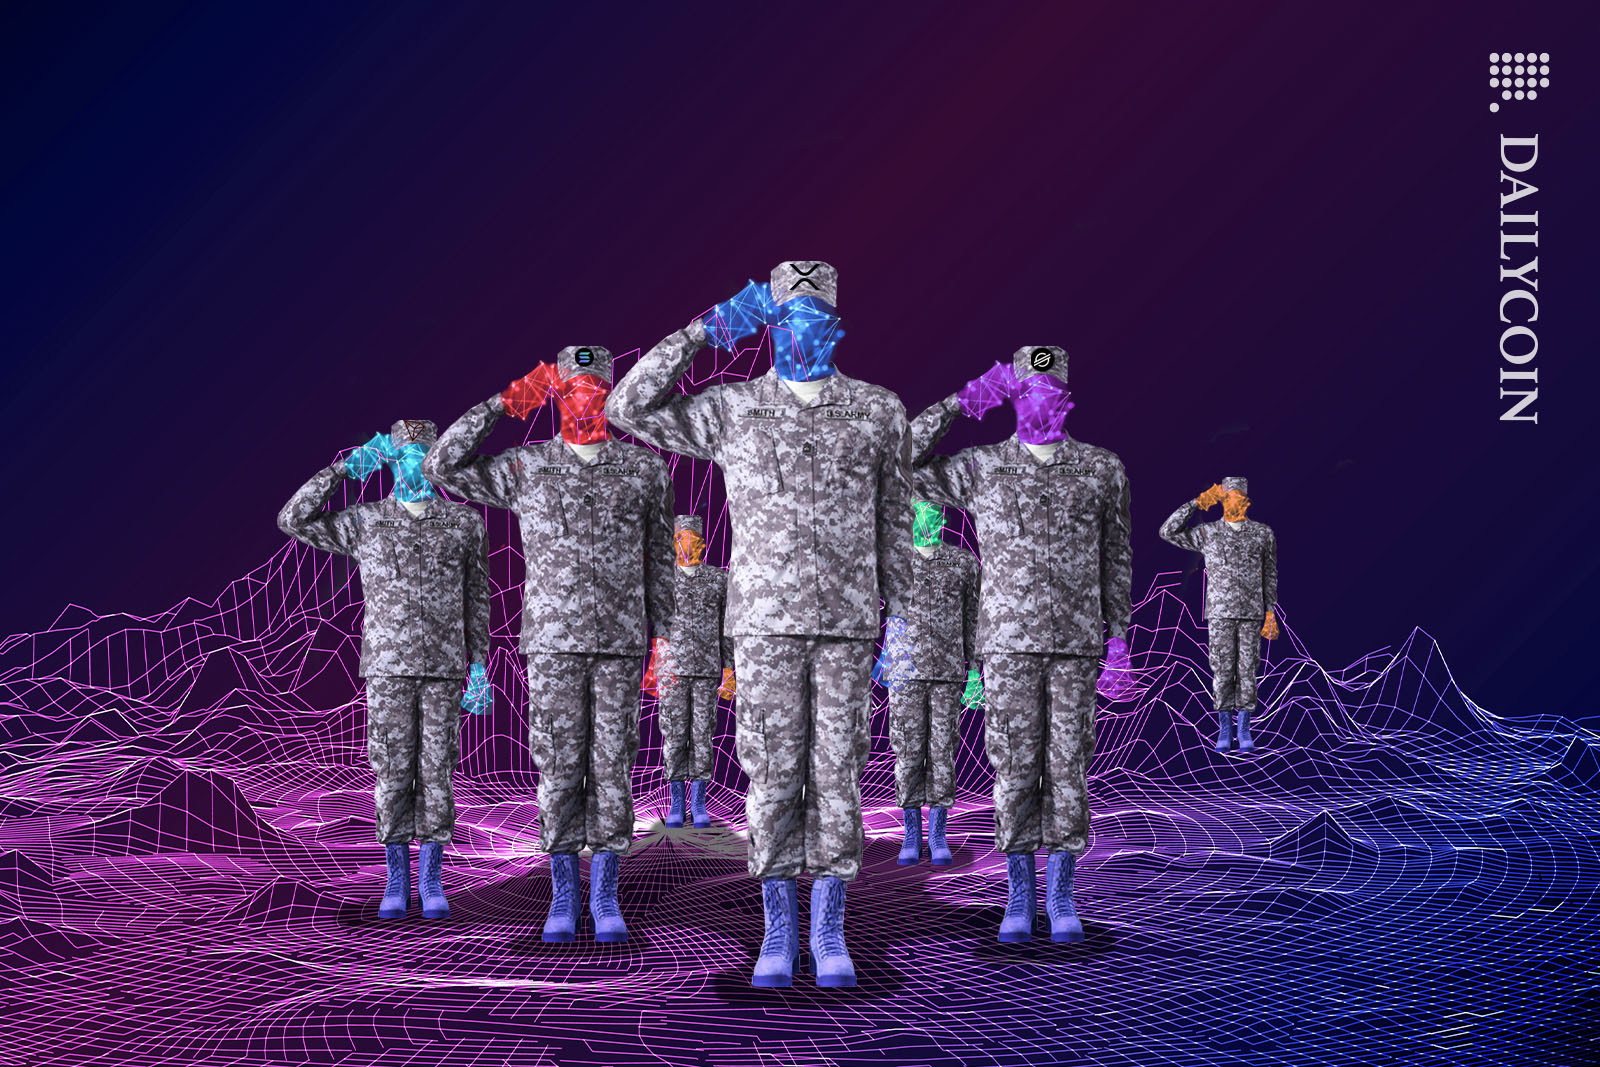 A group of crypto soldiers saluting, reporting to be regulated.